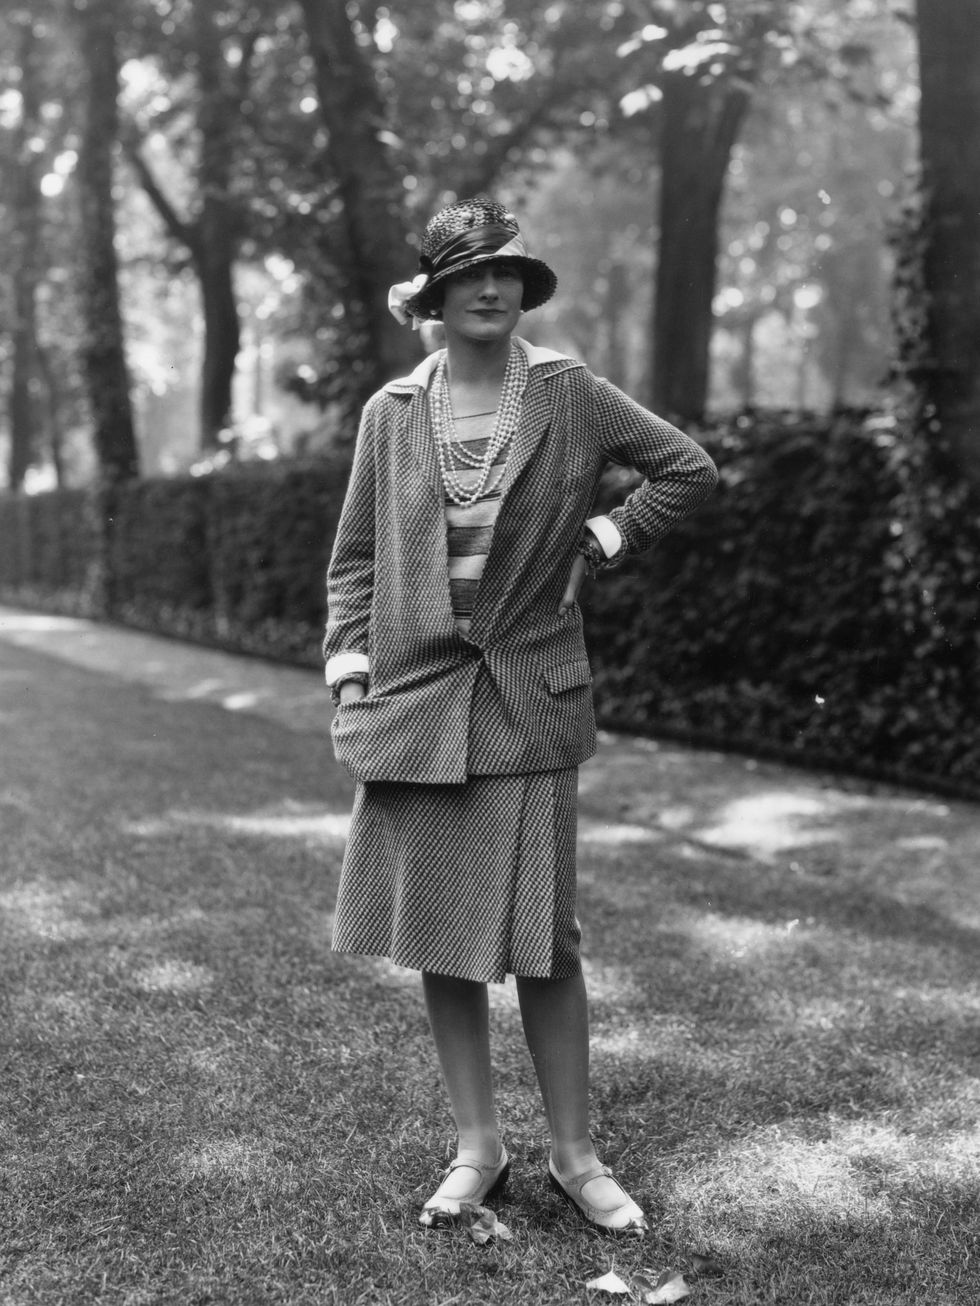 Coco Chanel - A Leader, A Legend